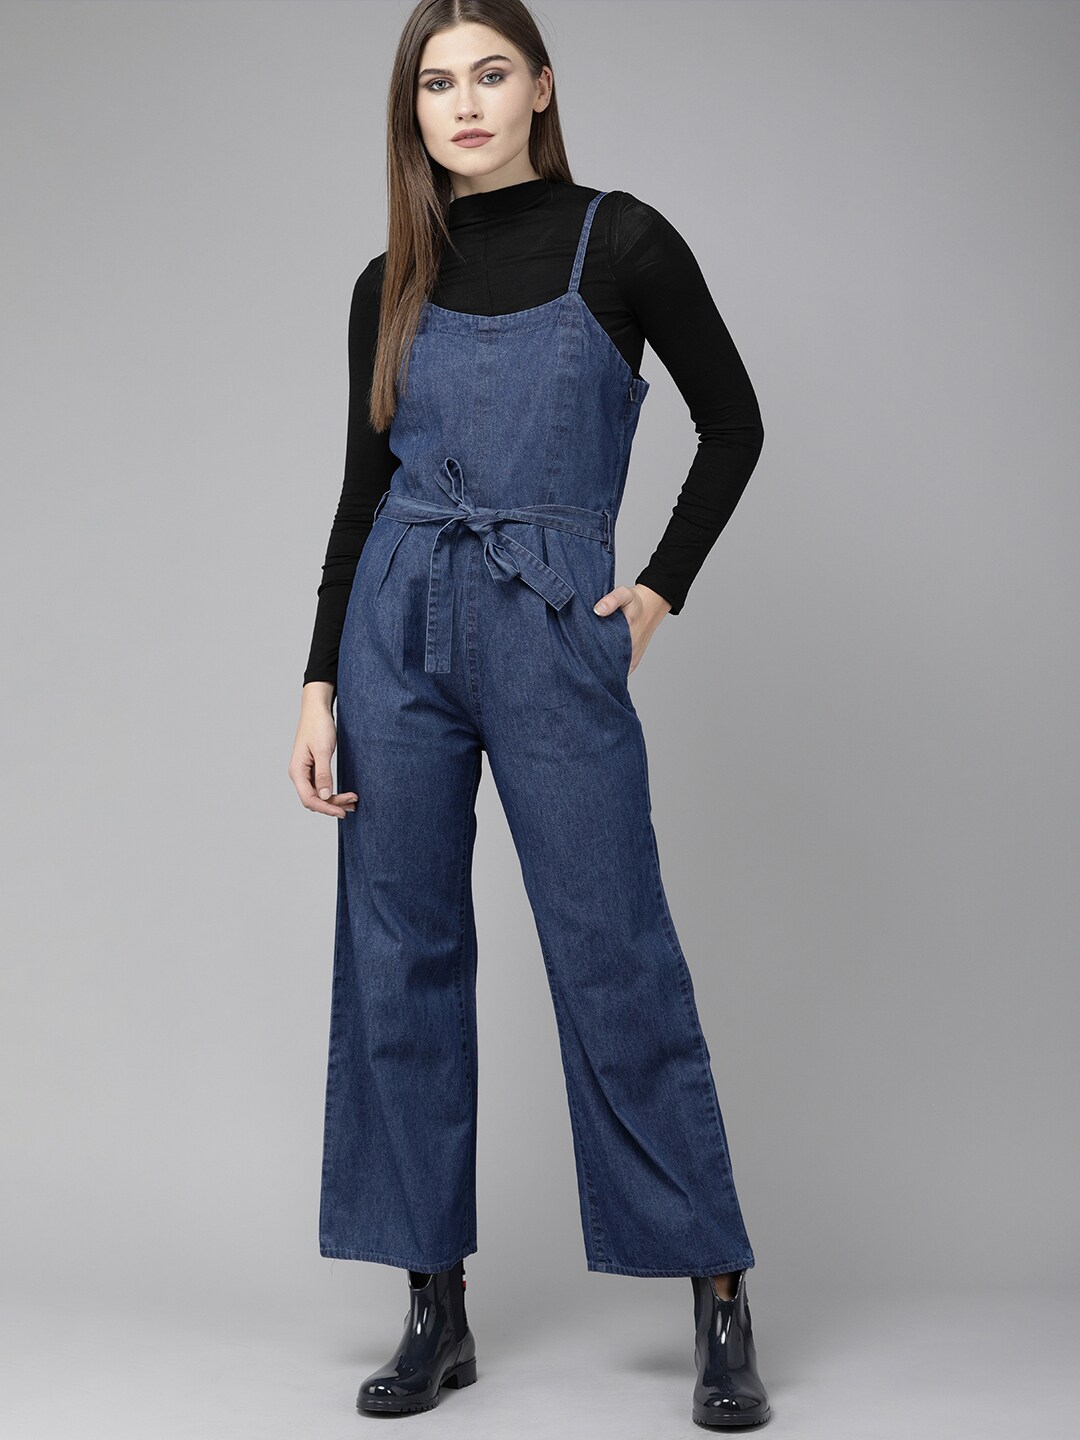 The Roadster Lifestyle Co Blue Waist Tie-Up Basic Denim Jumpsuit Price in India